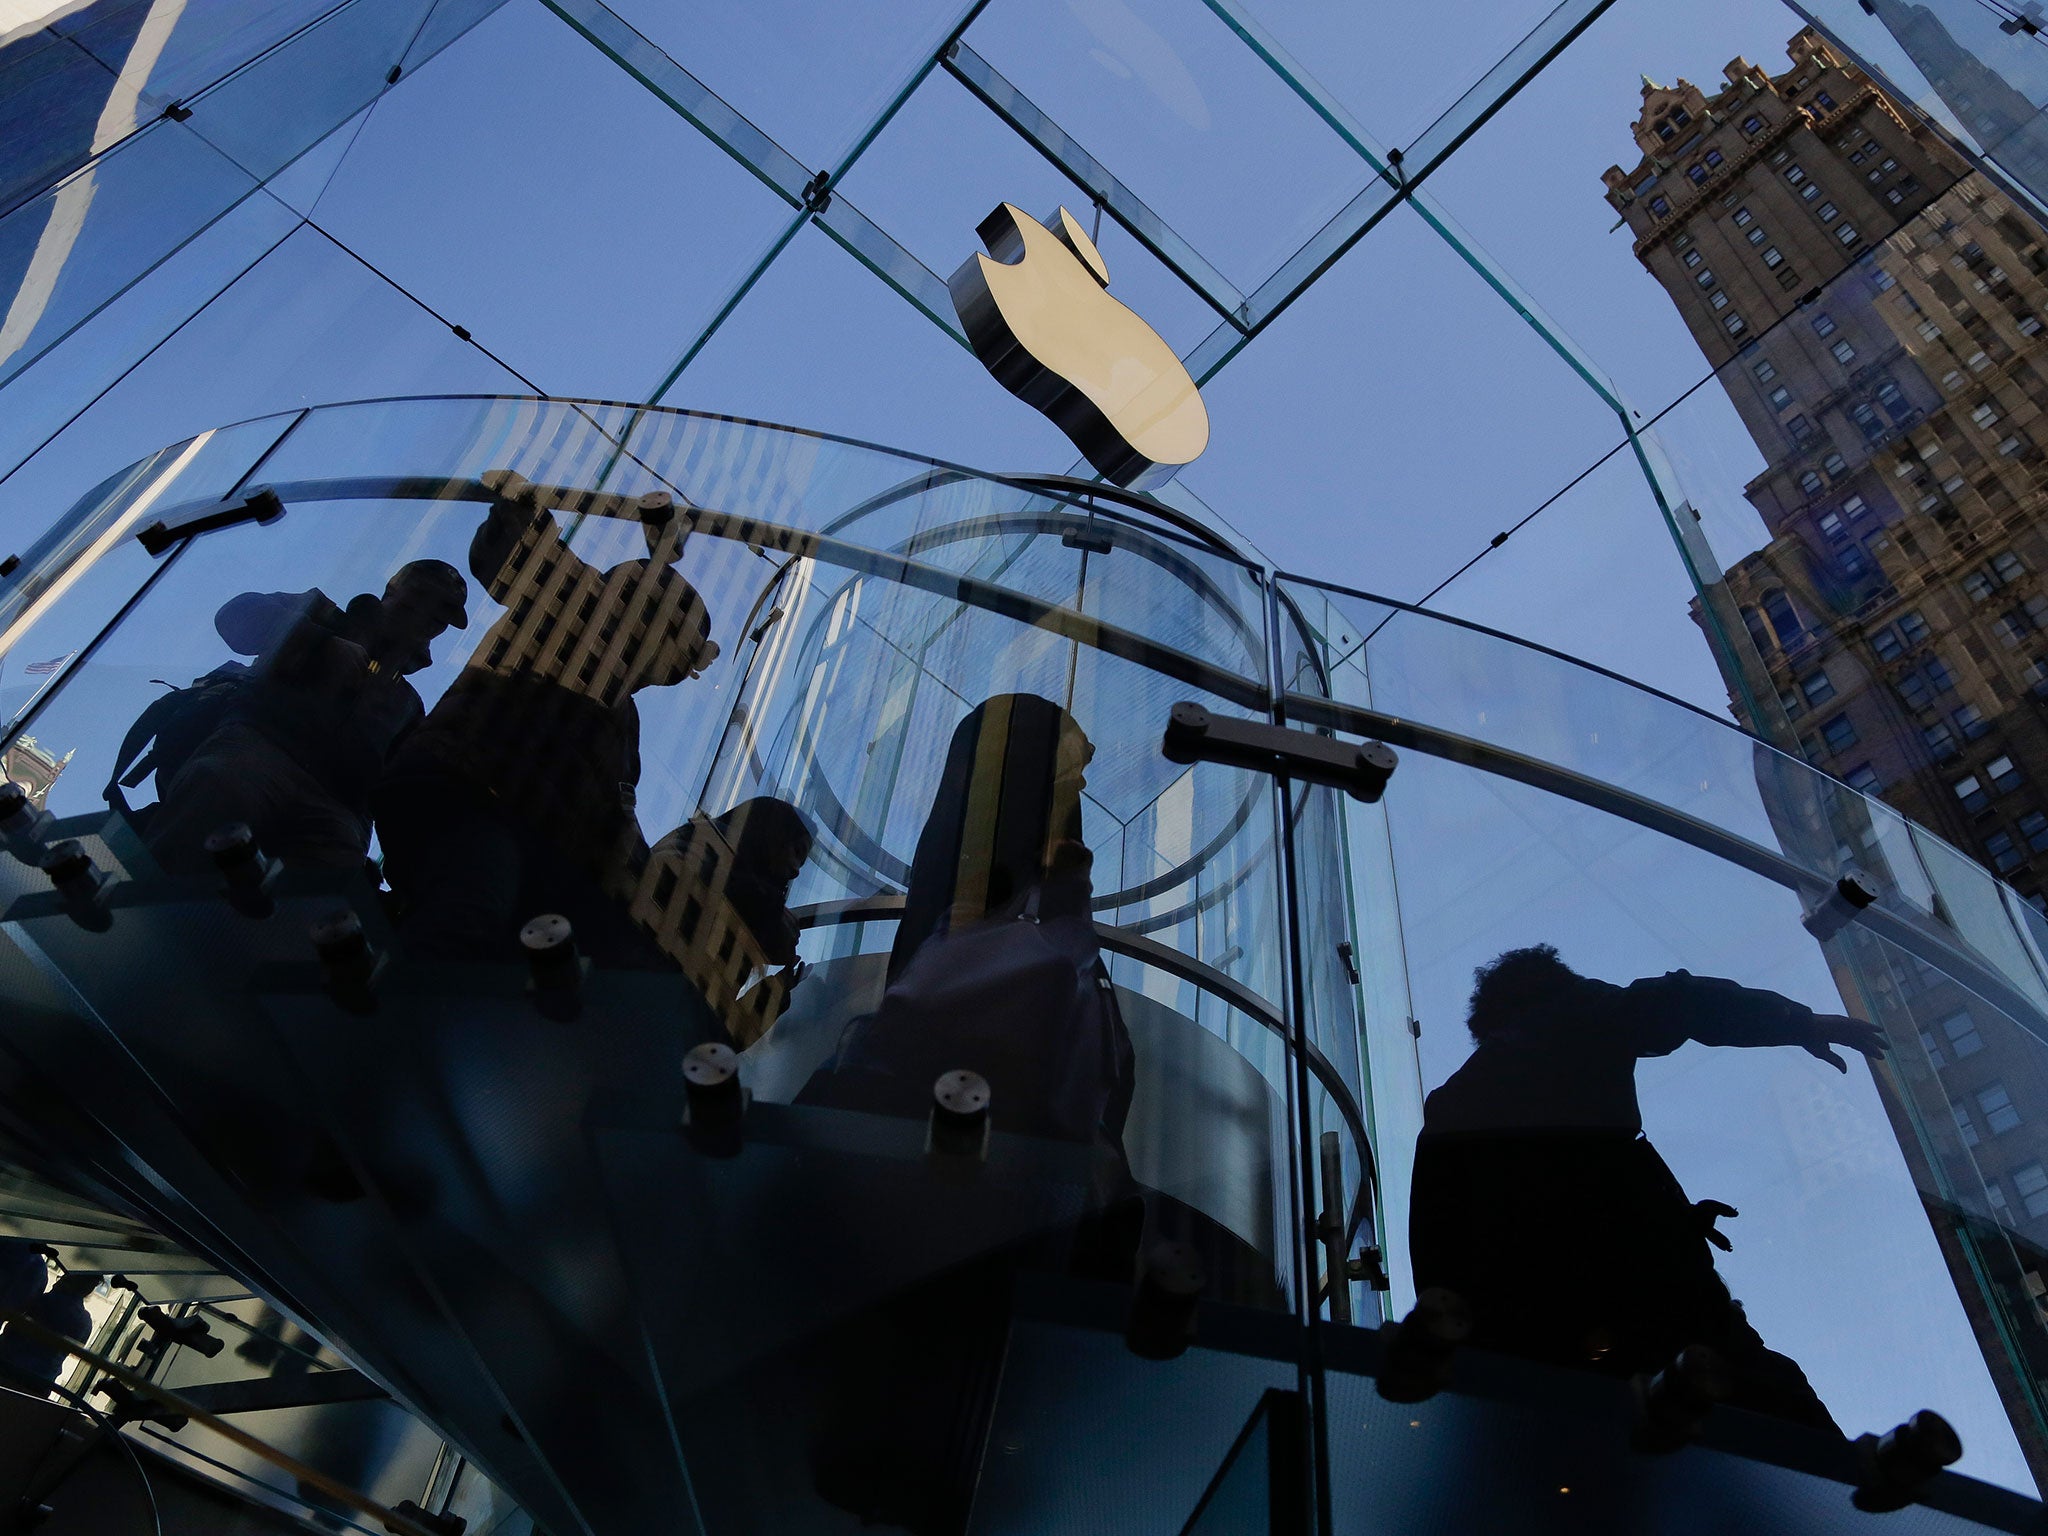 Apple has also faced questions over the amount of its UK tax payments